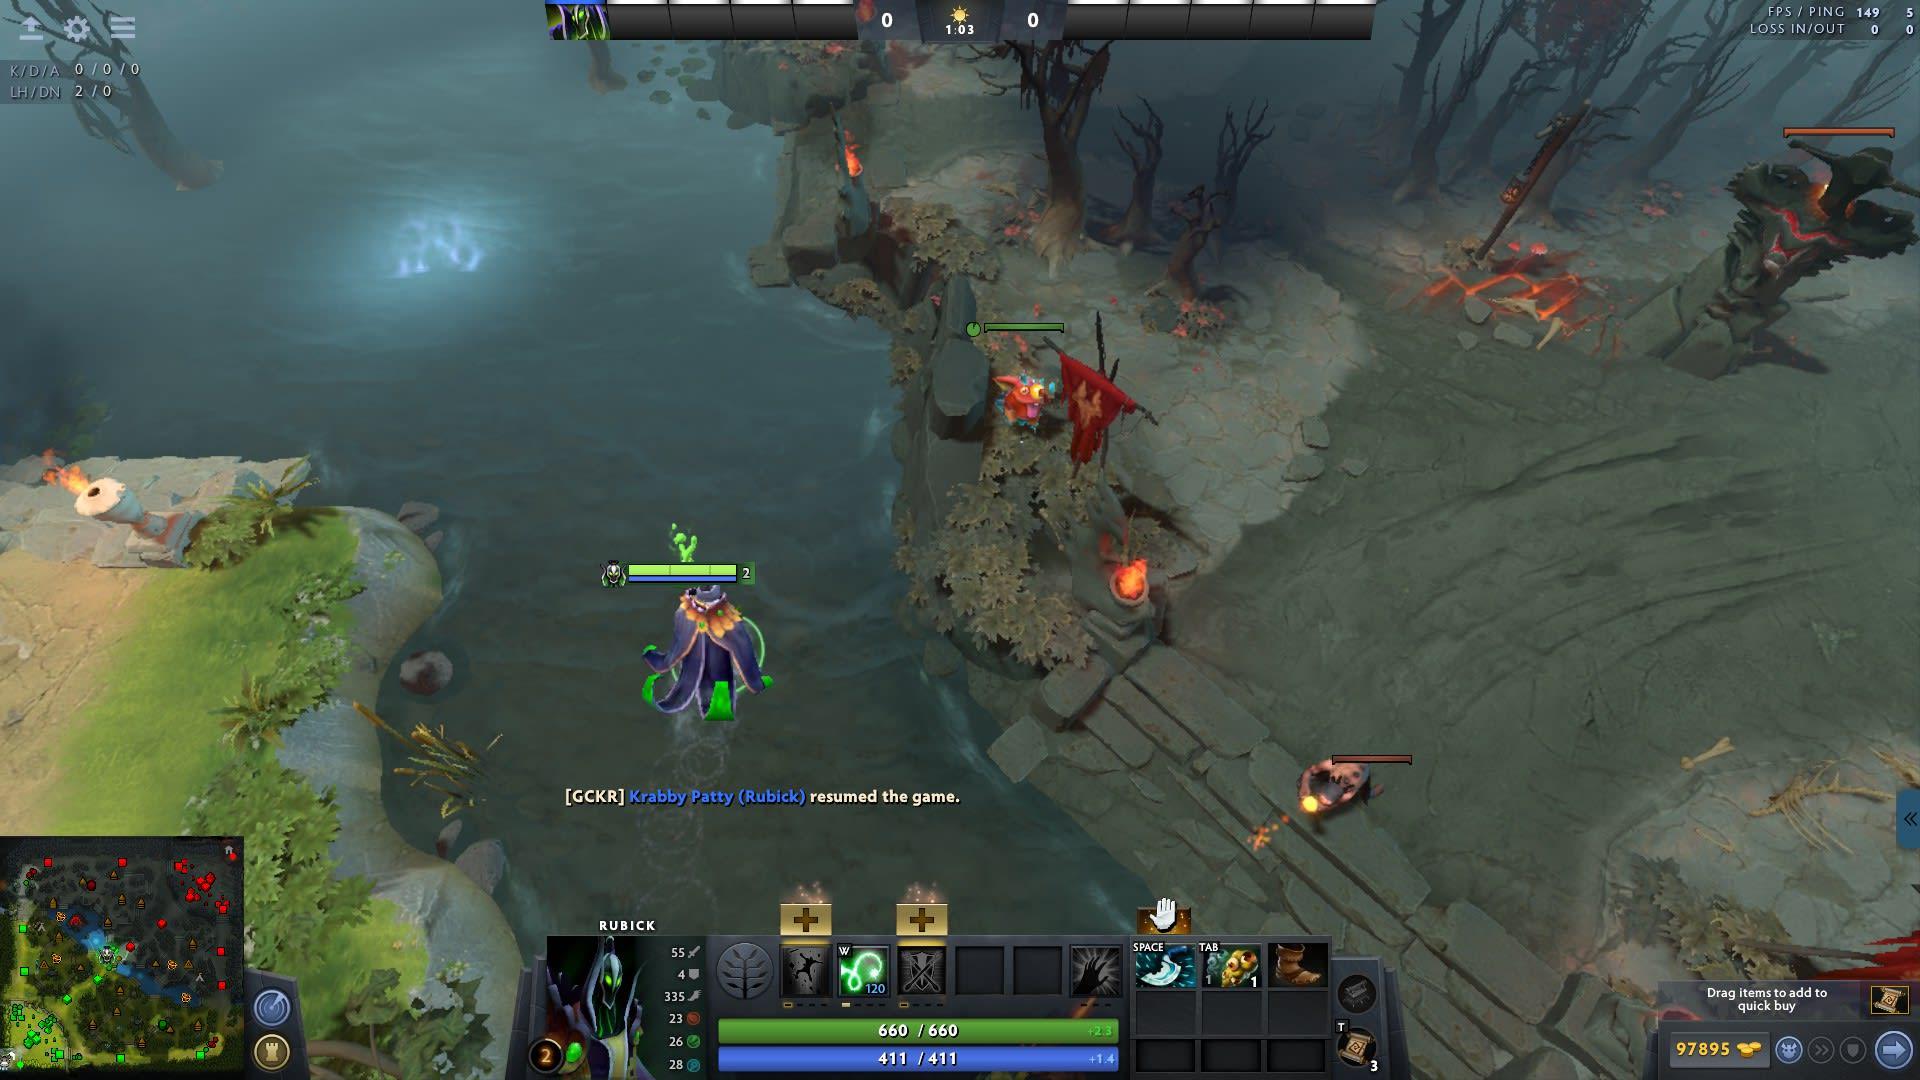 See the Top 10 Tips Everyone Should Know Before Playing Dota 2